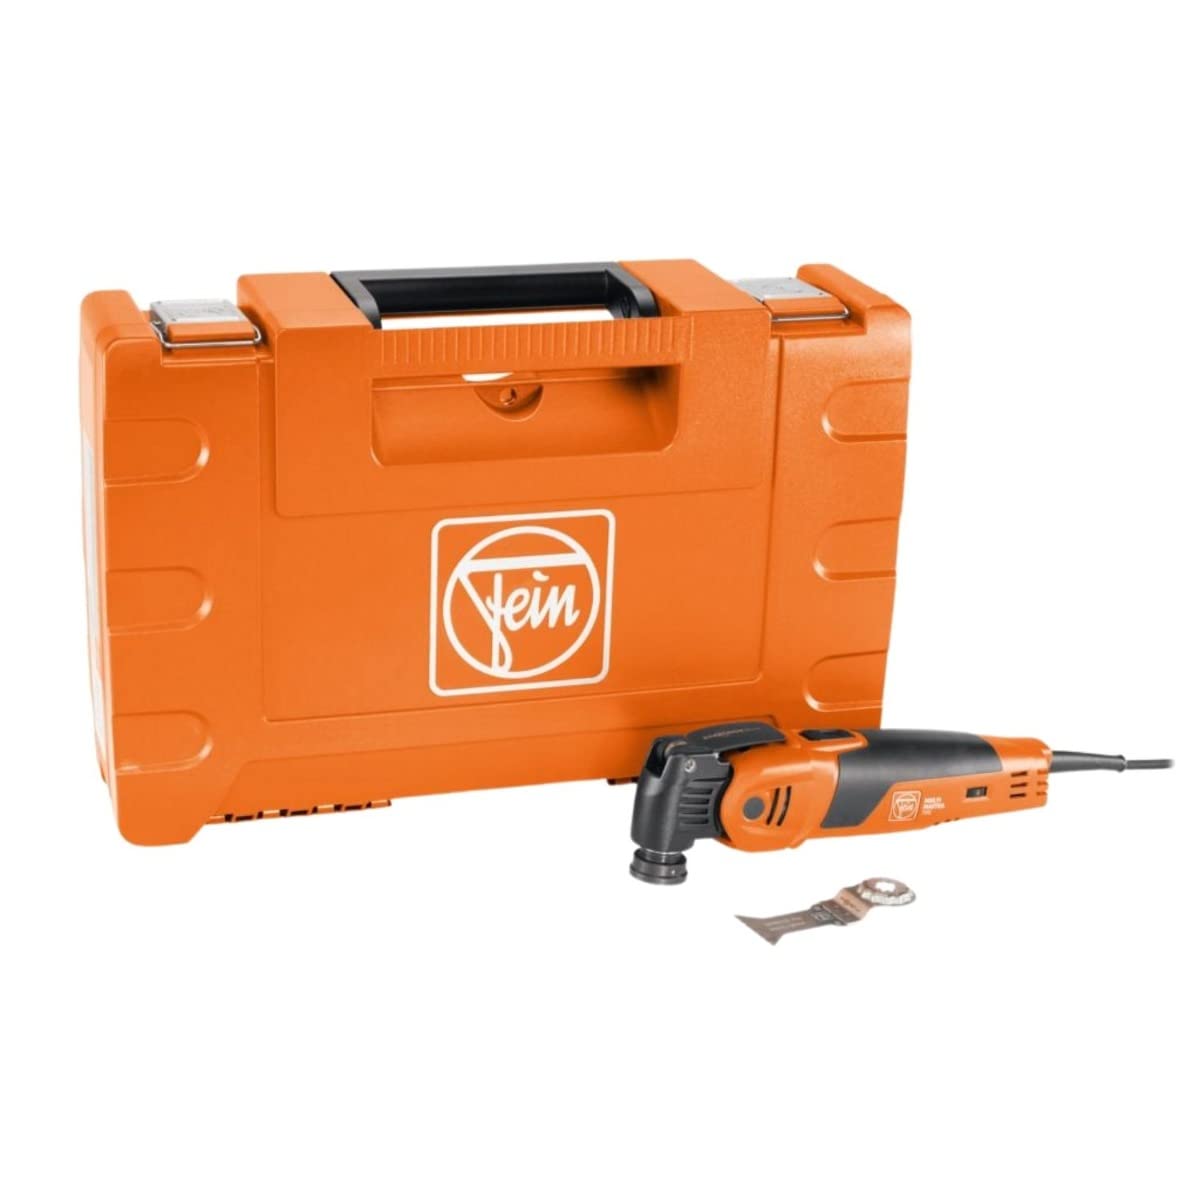 Fein StarLockMax MM 700 Max Basic Set with QuickIn System Oscillating MultiTools - 250W Output 10000-19500 OPM 2 x 20